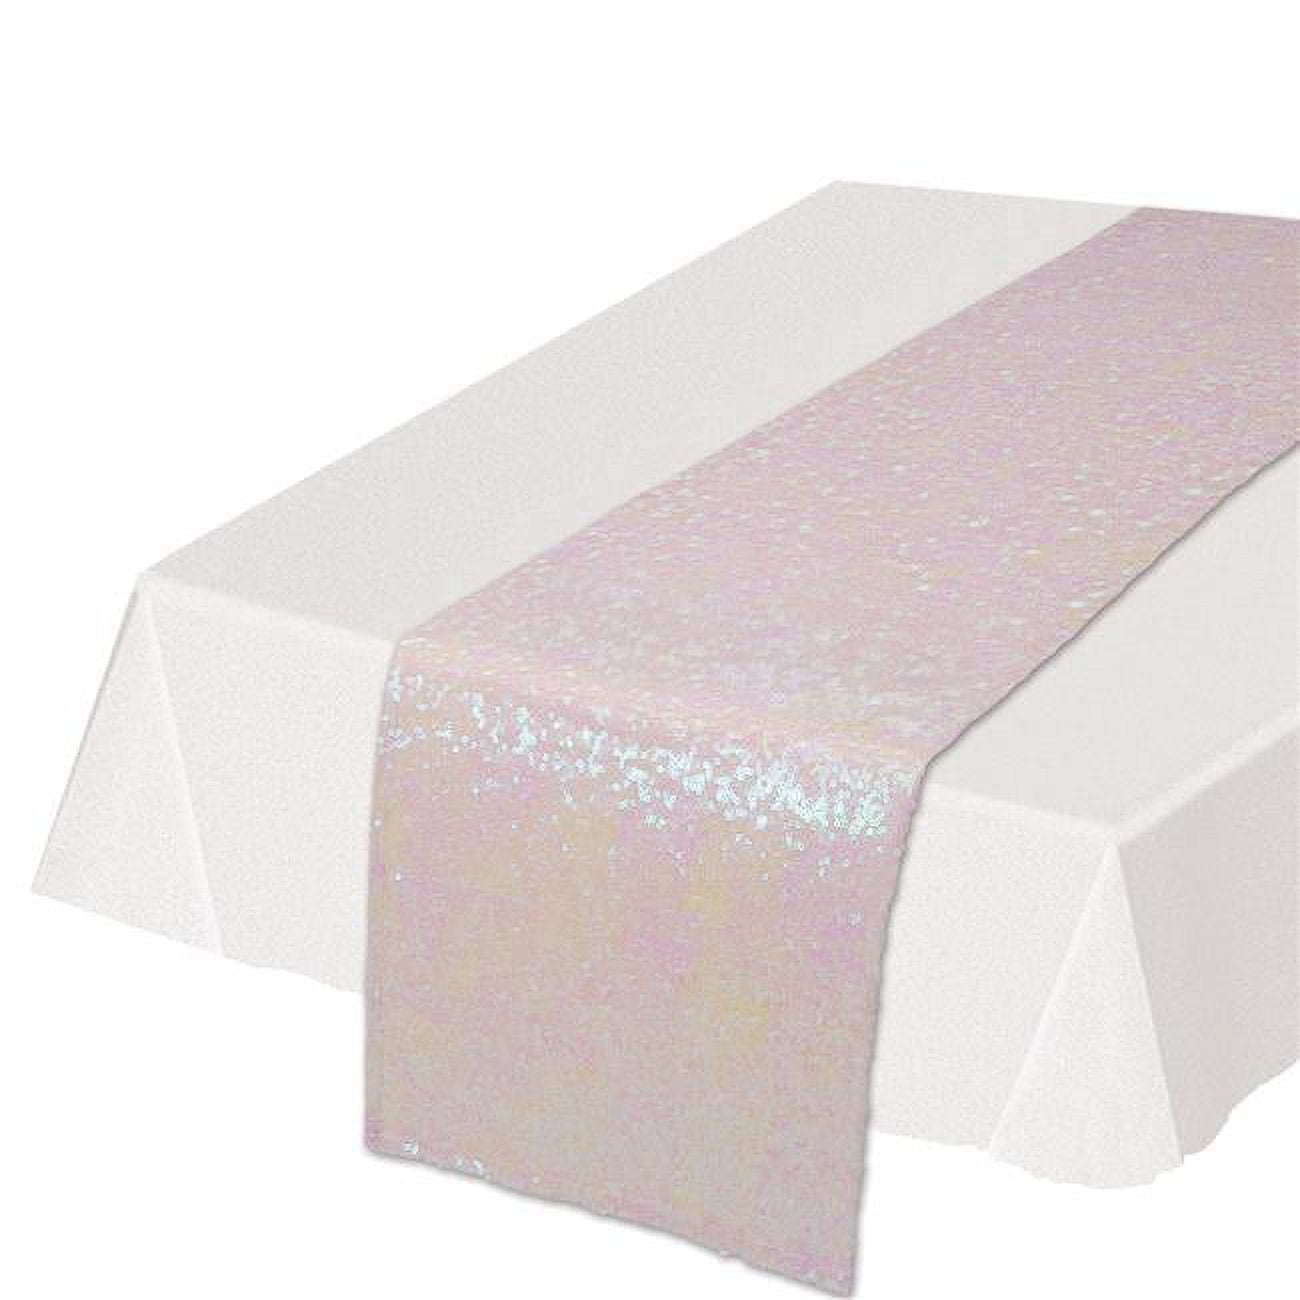 Picture of Beistle 54111-OP Sequined Table Runner, Opalescent